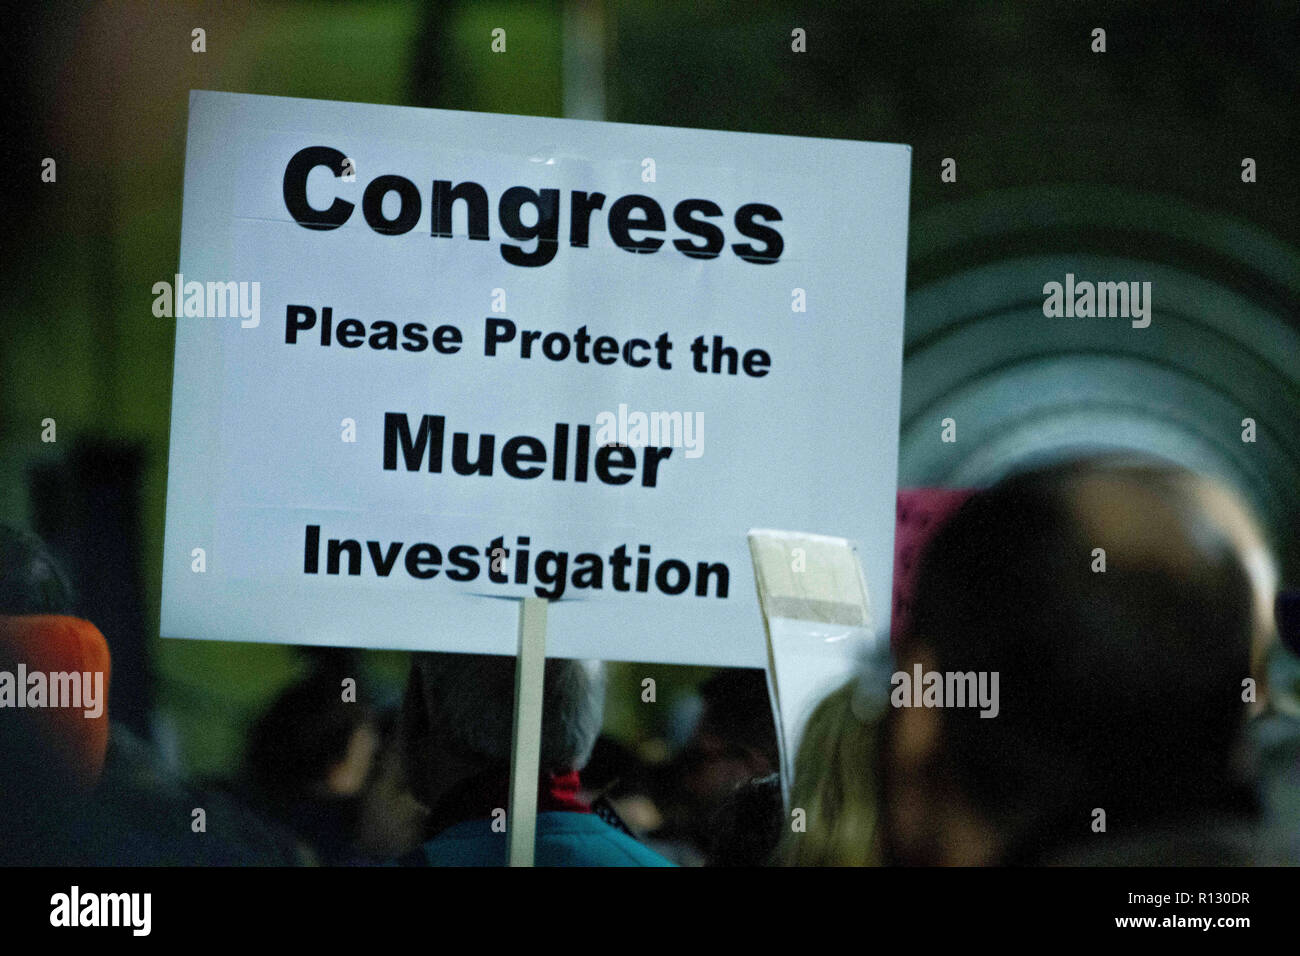 Philadelphia, Pennsylvania, USA. November 8, 2018 - Hundreds of protestors gather and march in Philadelphia, November 8, 2018 in an event pre-planned by organizers and triggered by President Trump's firing of Attorney General Sessions and appointment of Matthew Whitaker as Acting AG, seen as a potential threat against the Mueller investigation. Credit: Michael Candelori/ZUMA Wire/Alamy Live News Stock Photo